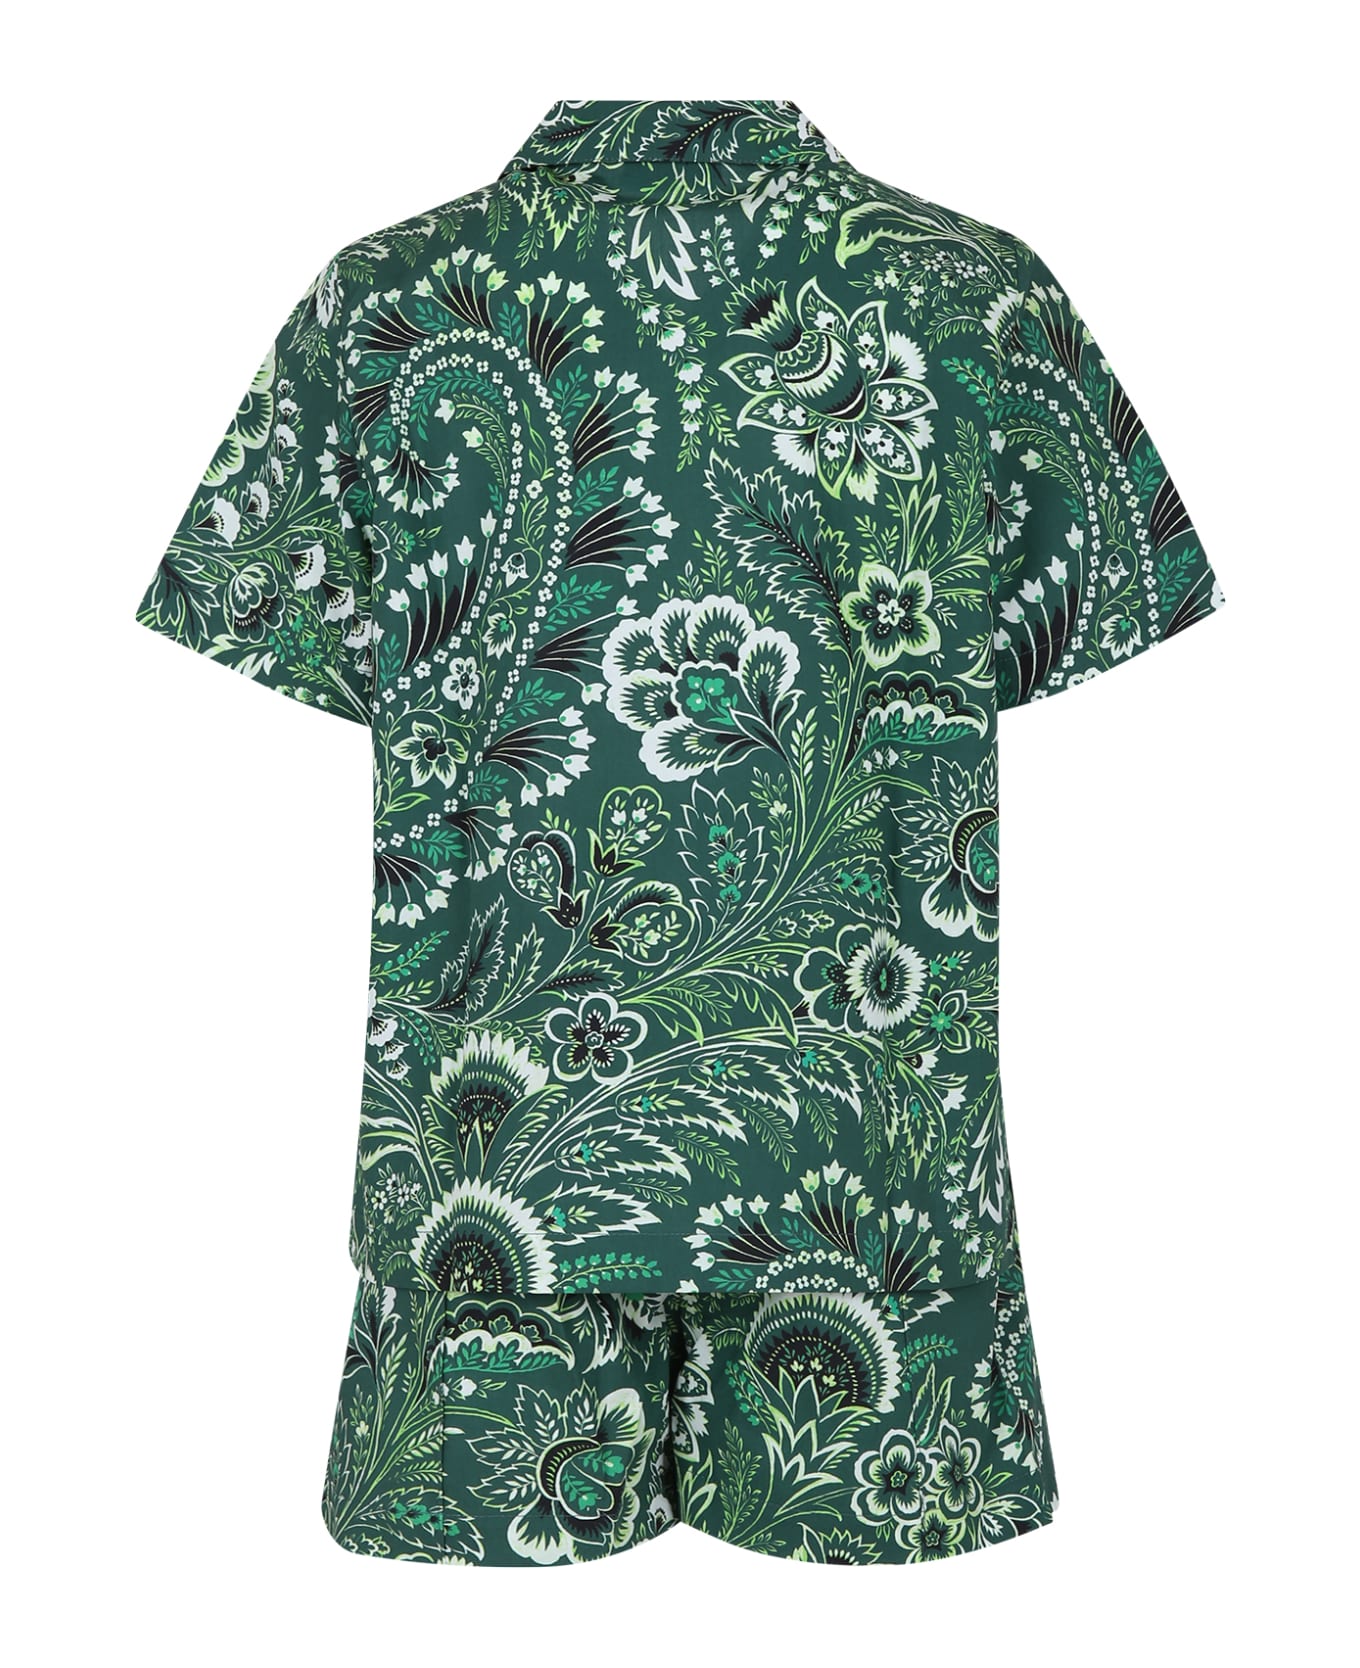 Etro Green Suit For Boy With Paisley Pattern - Green